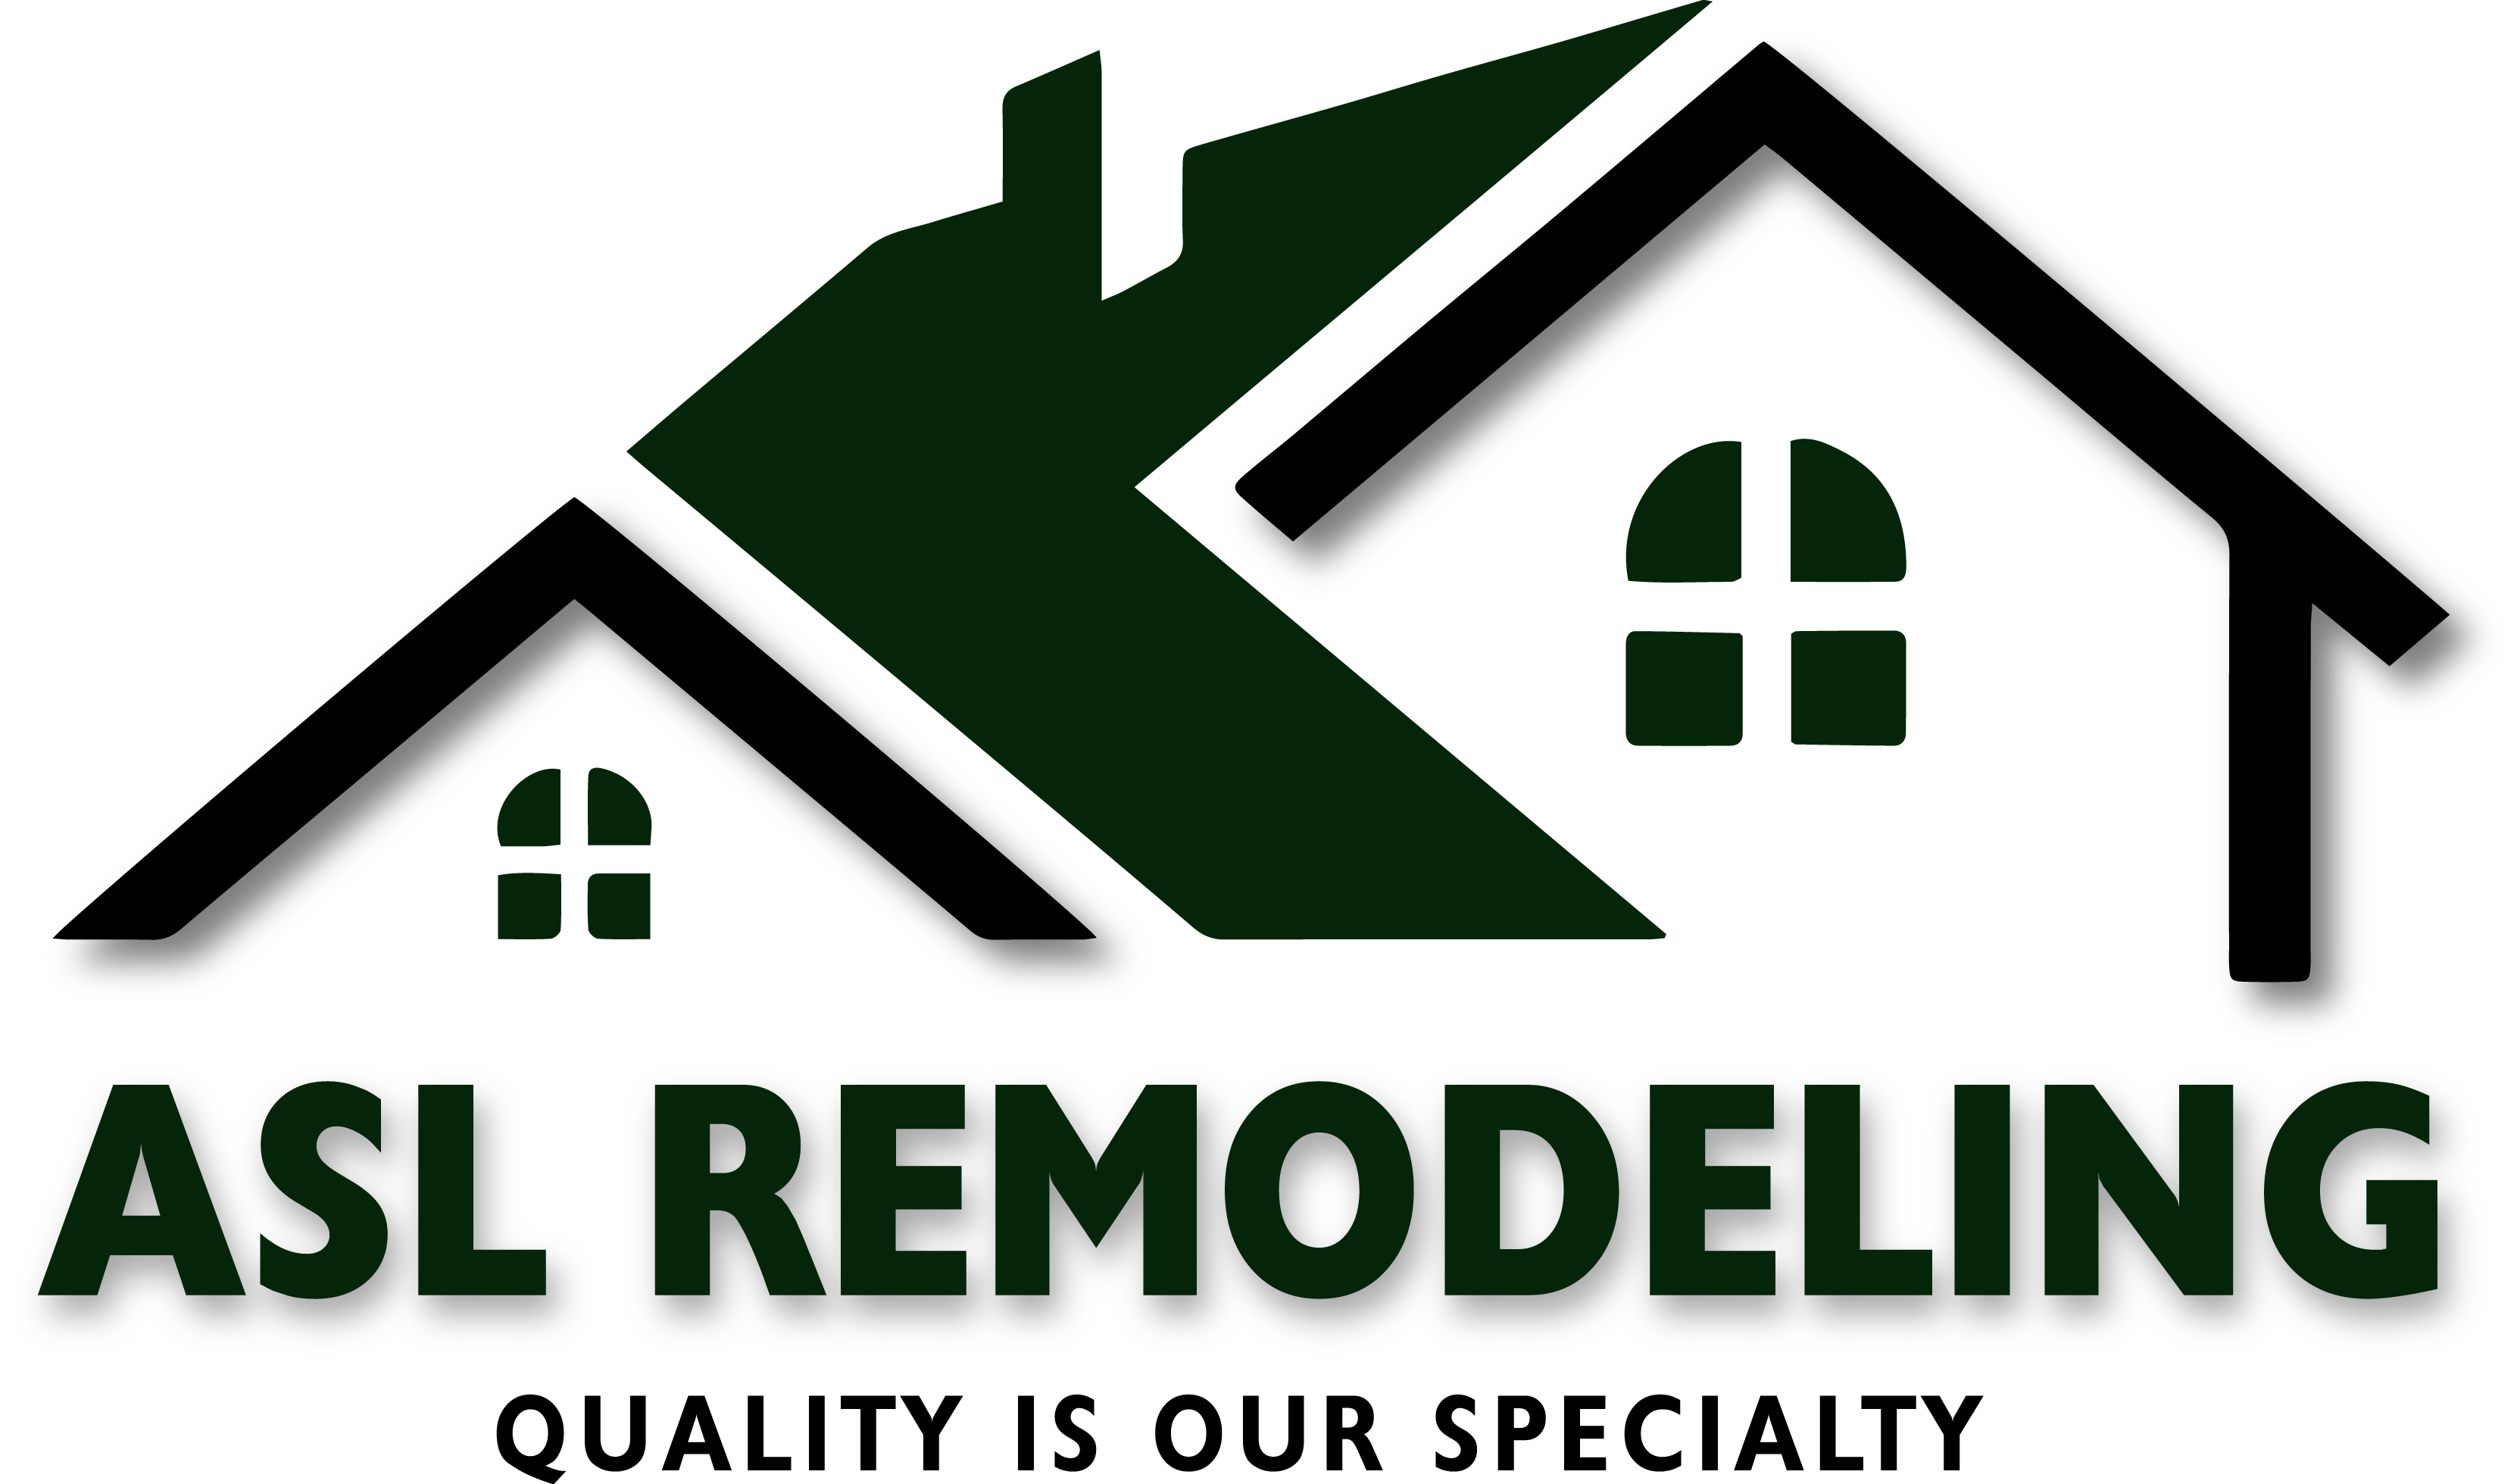 ASL Remodeling construction company has been providing custom home remodeling services and professional home building services in the Bay Area for over 20 years